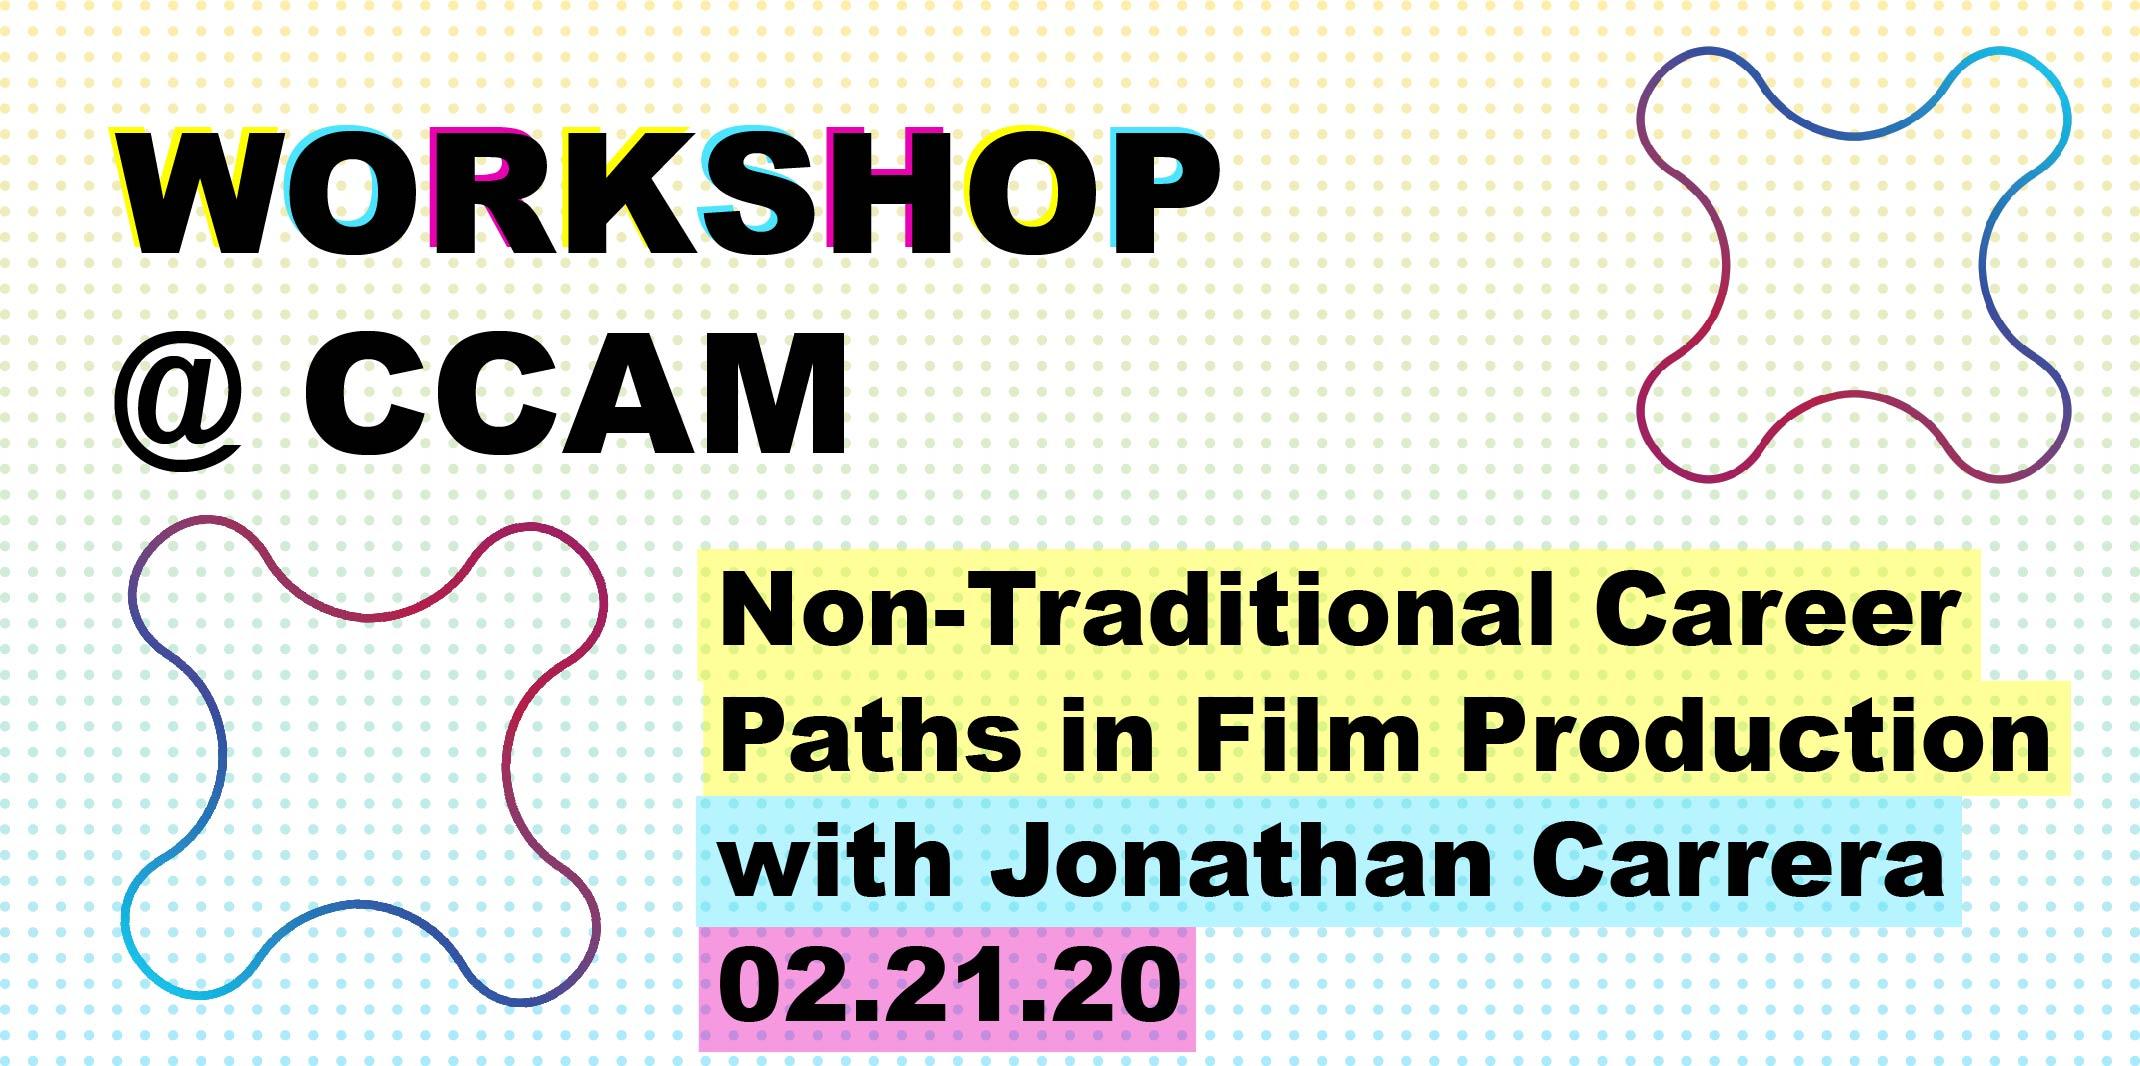 Workshop: Non-Traditional Career Paths in Film Production